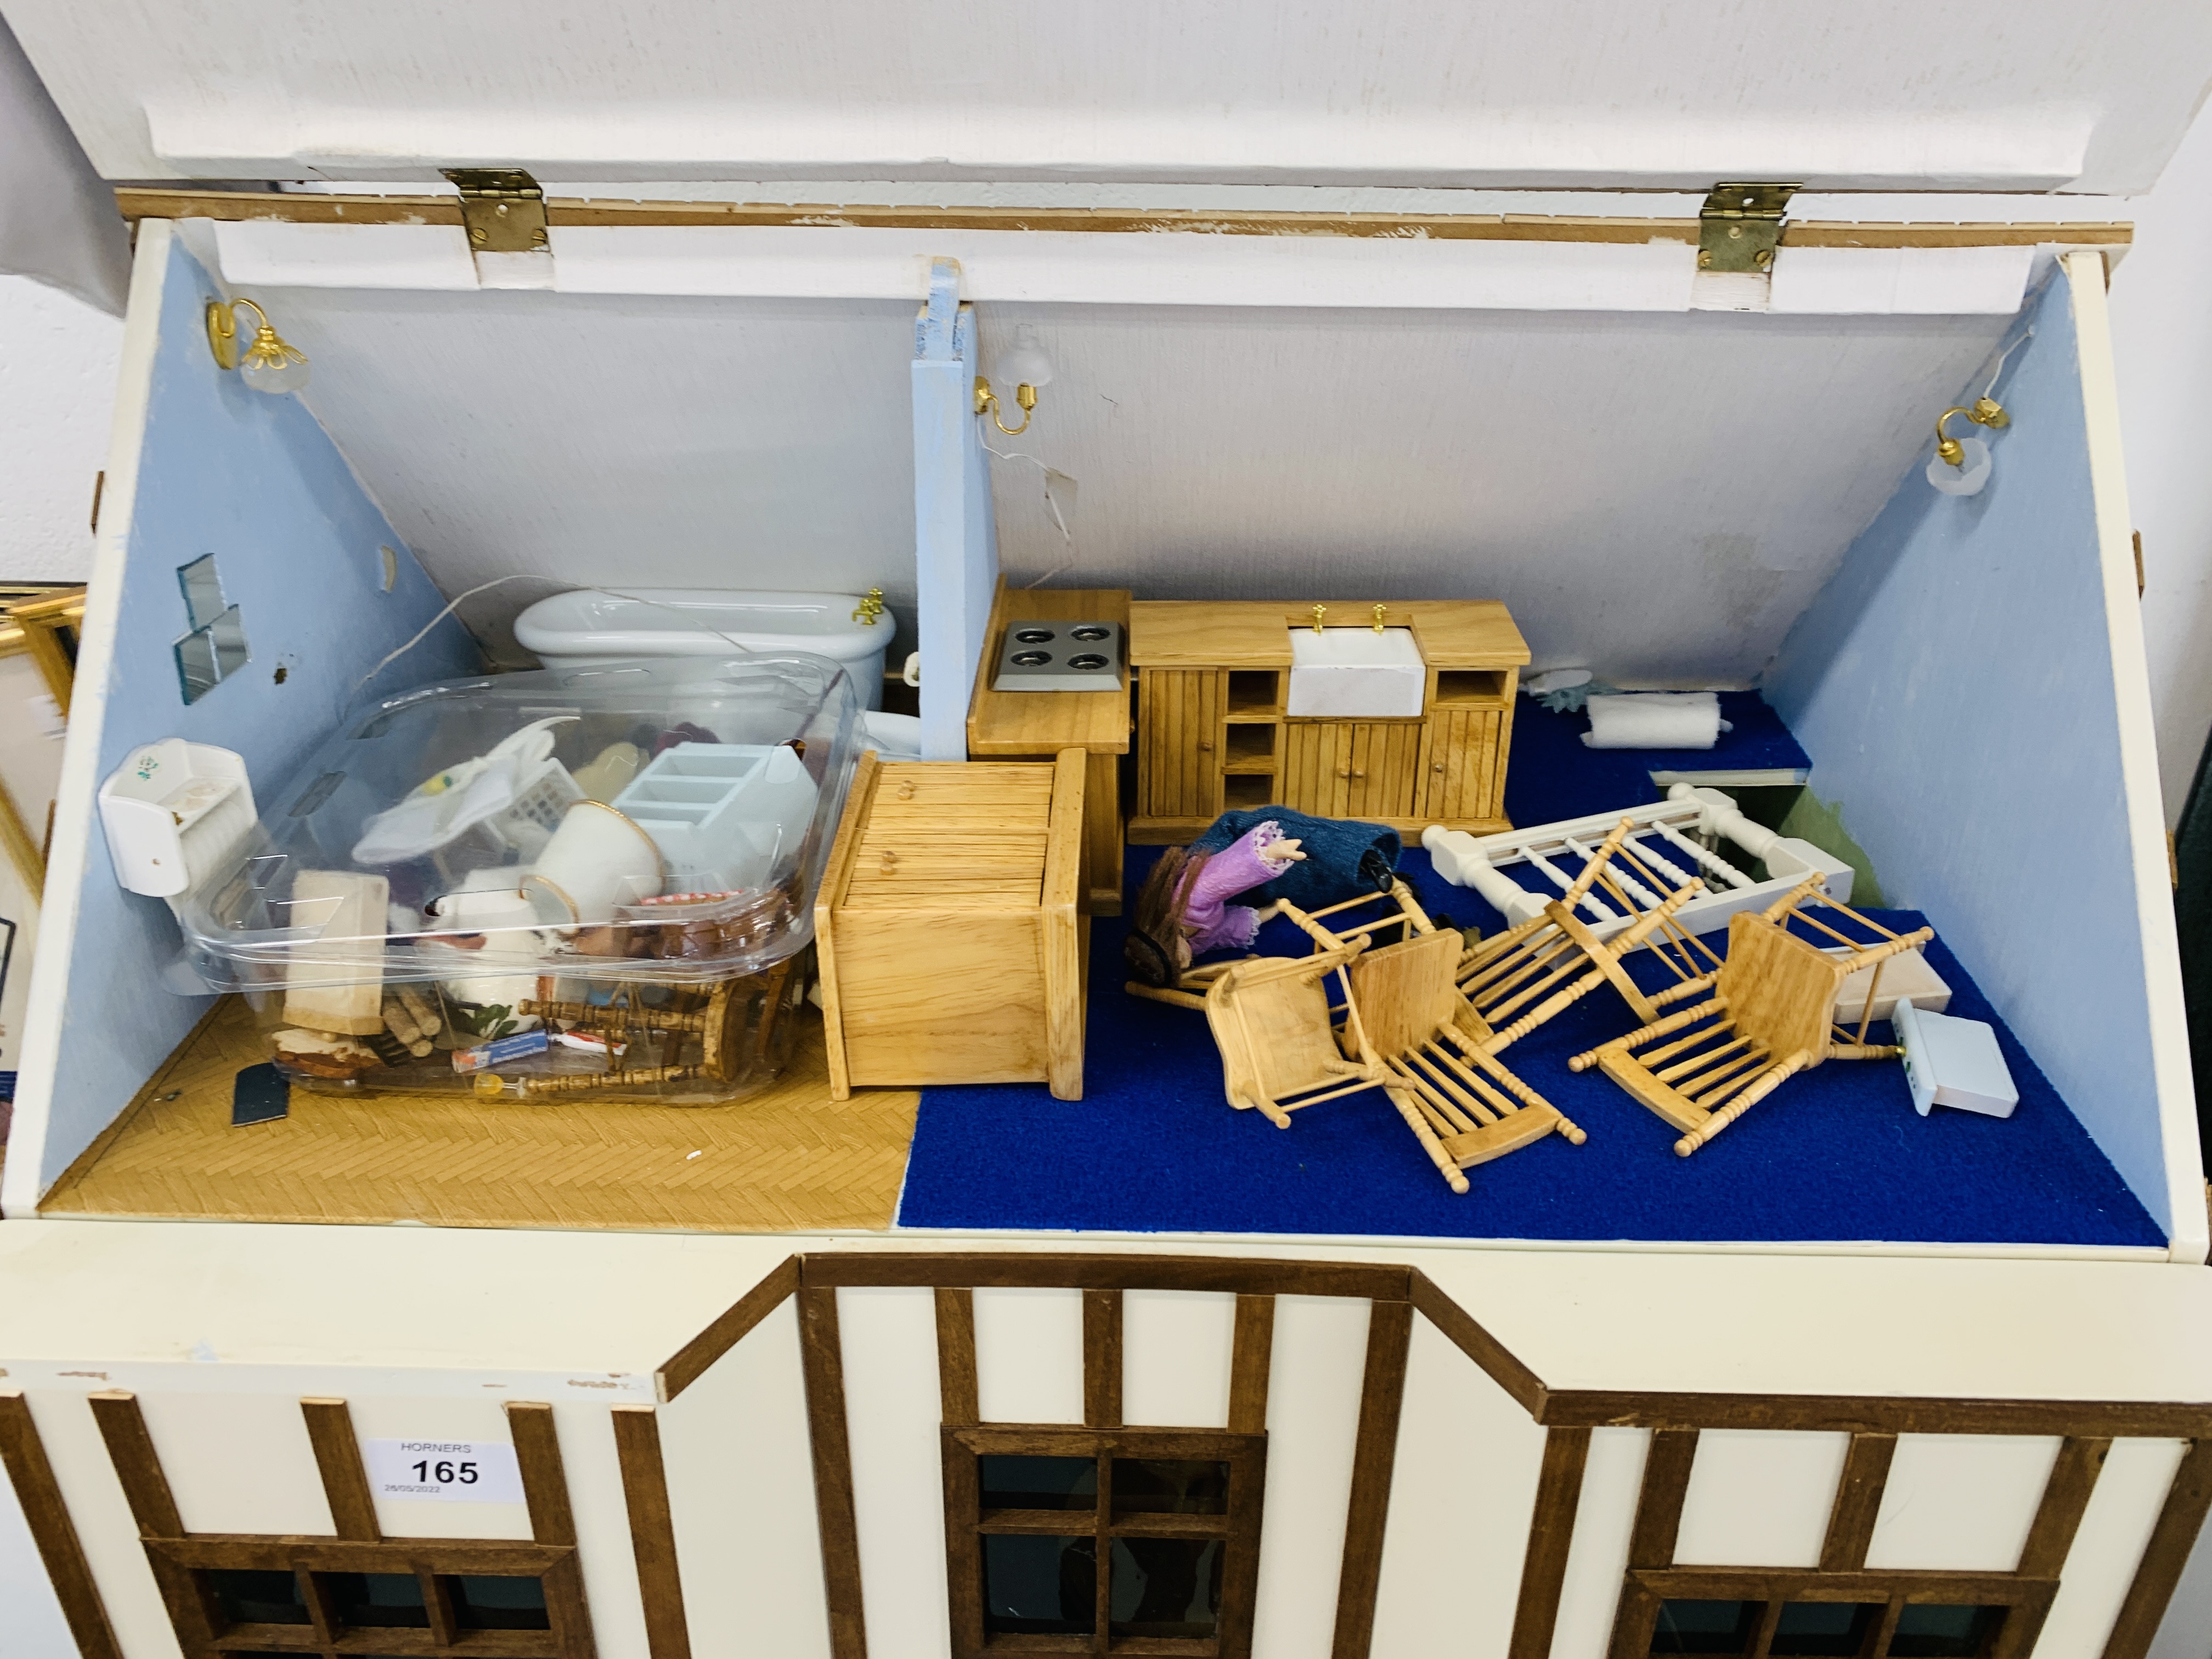 THREE STOREY DOLLS HOUSE ALONG WITH VARIOUS MINIATURE DOLLS HOUSE FURNITURE H 69CM, W 59CM, D 42CM. - Image 8 of 12